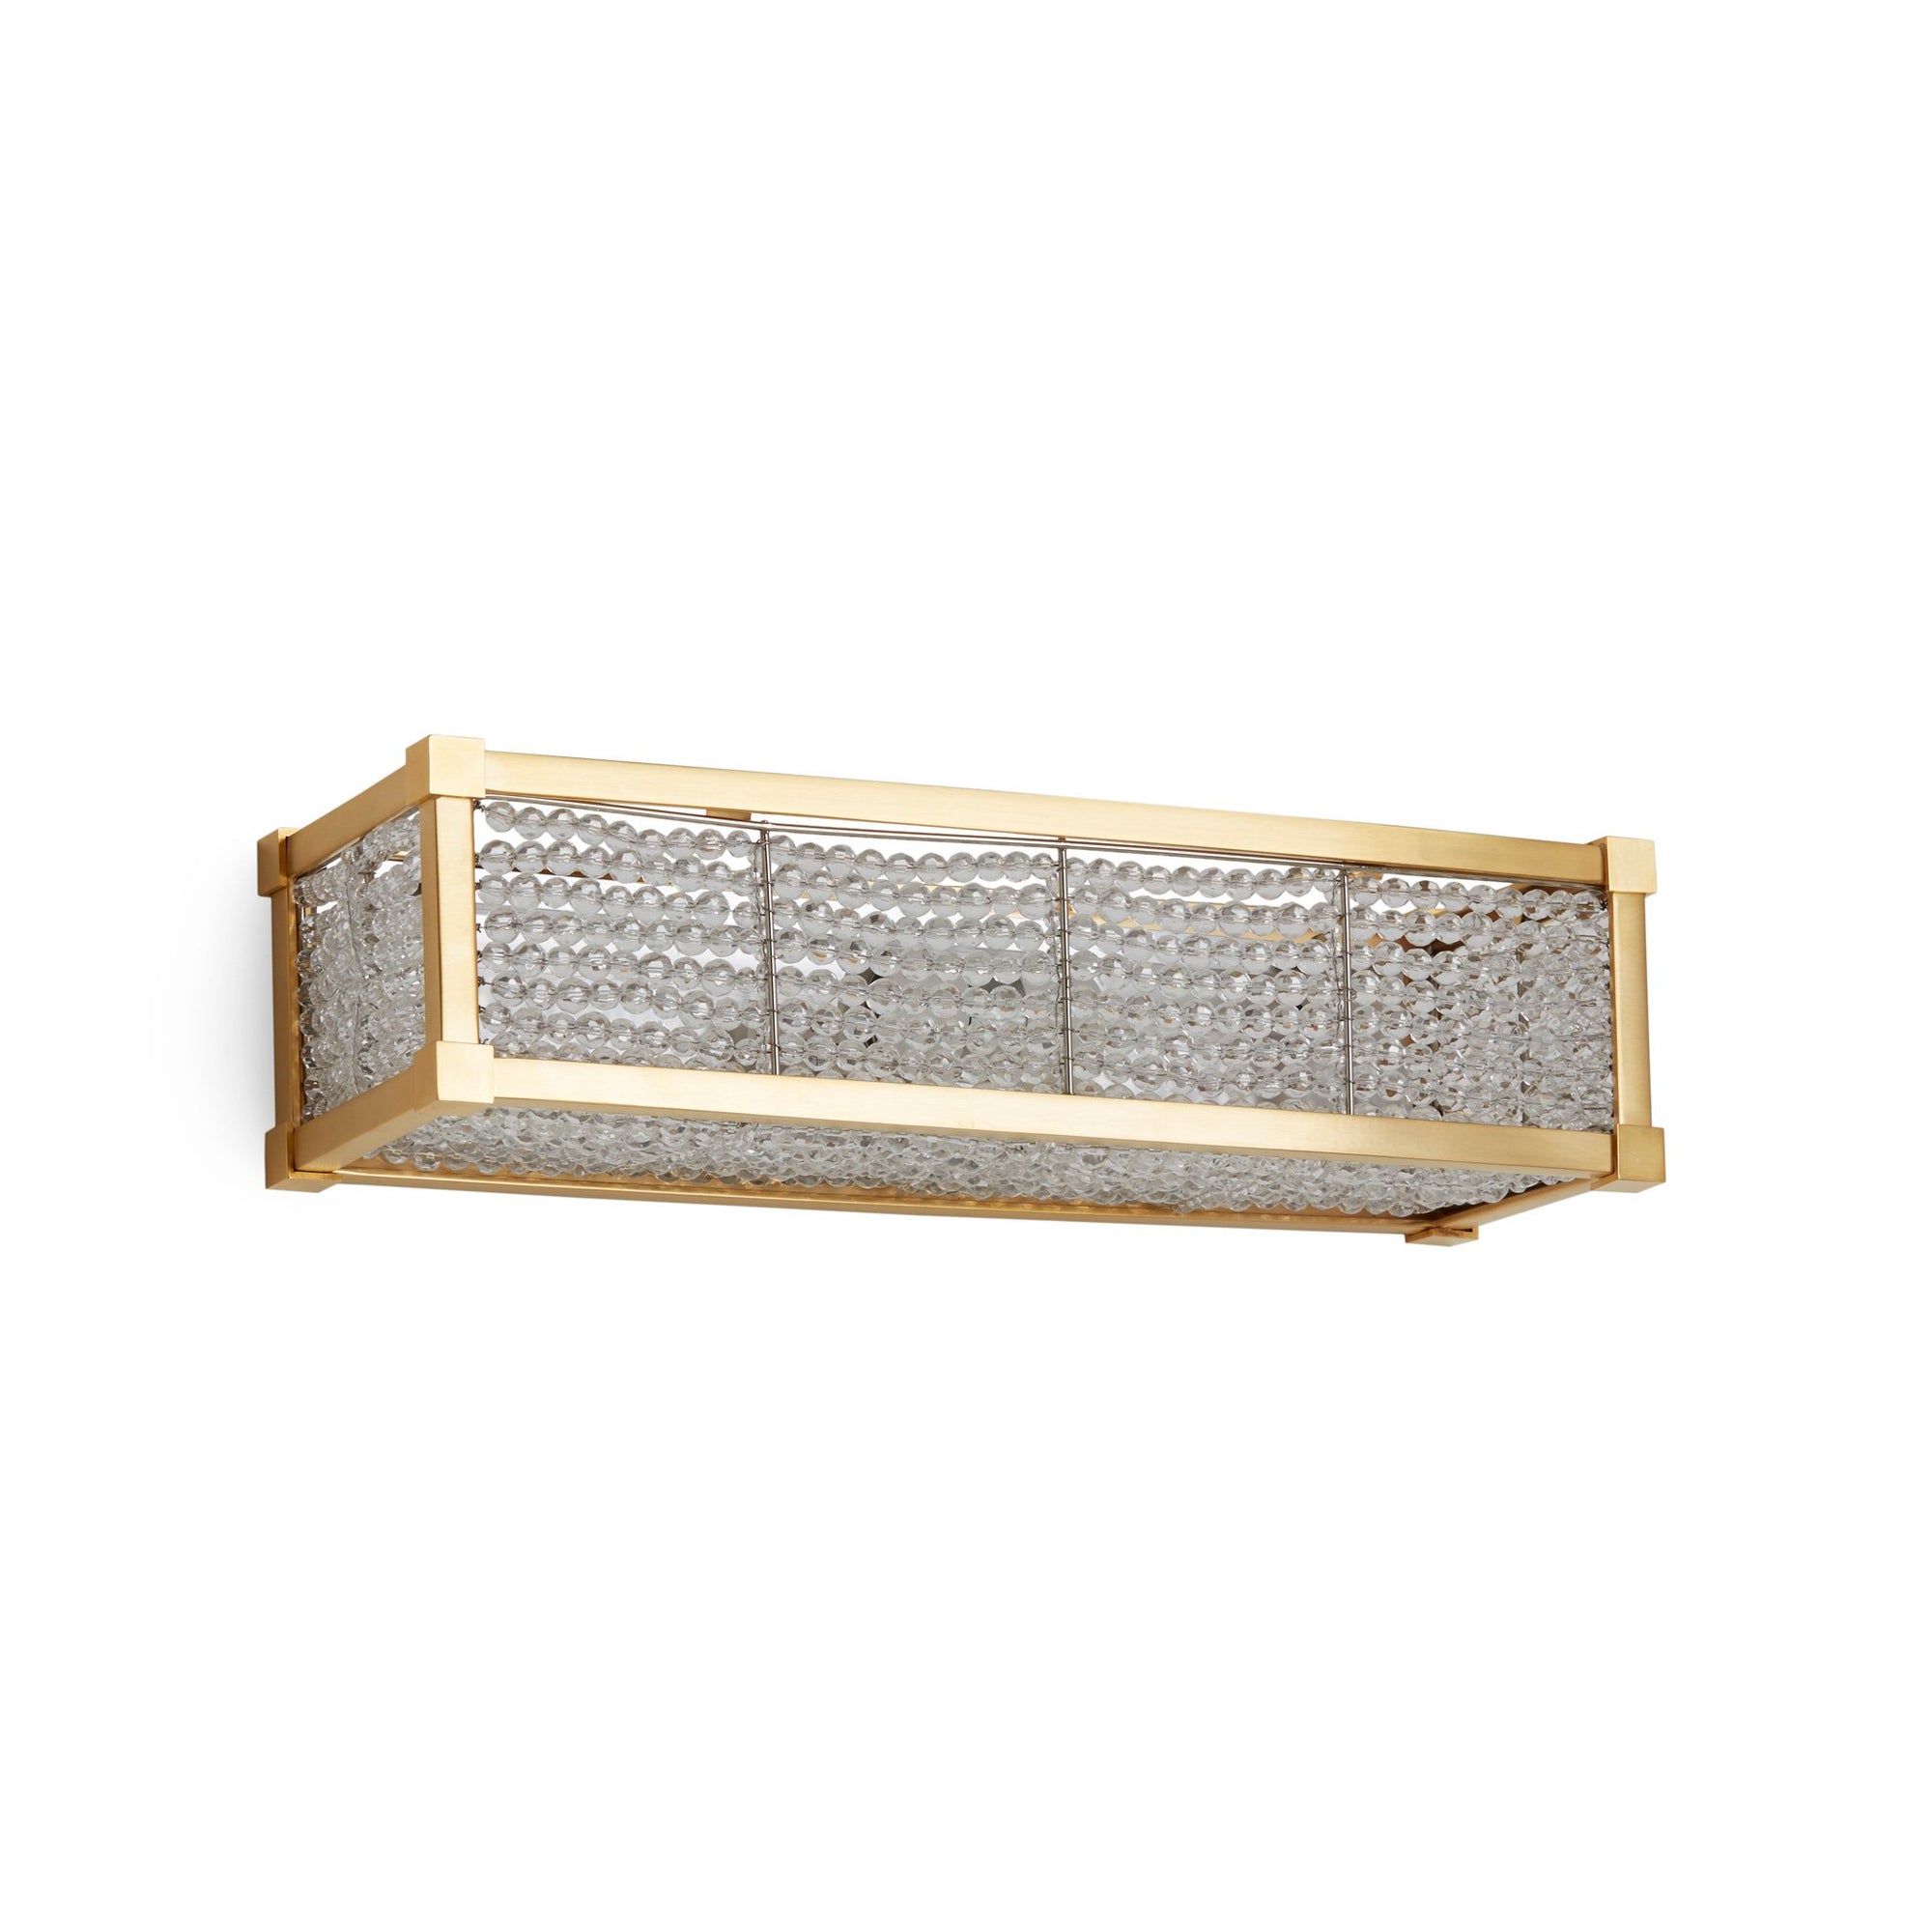 7114CB-16-GP Sherle Wagner International Square Knuckle Crystal Beaded Panel Light in Gold Plate metal finish